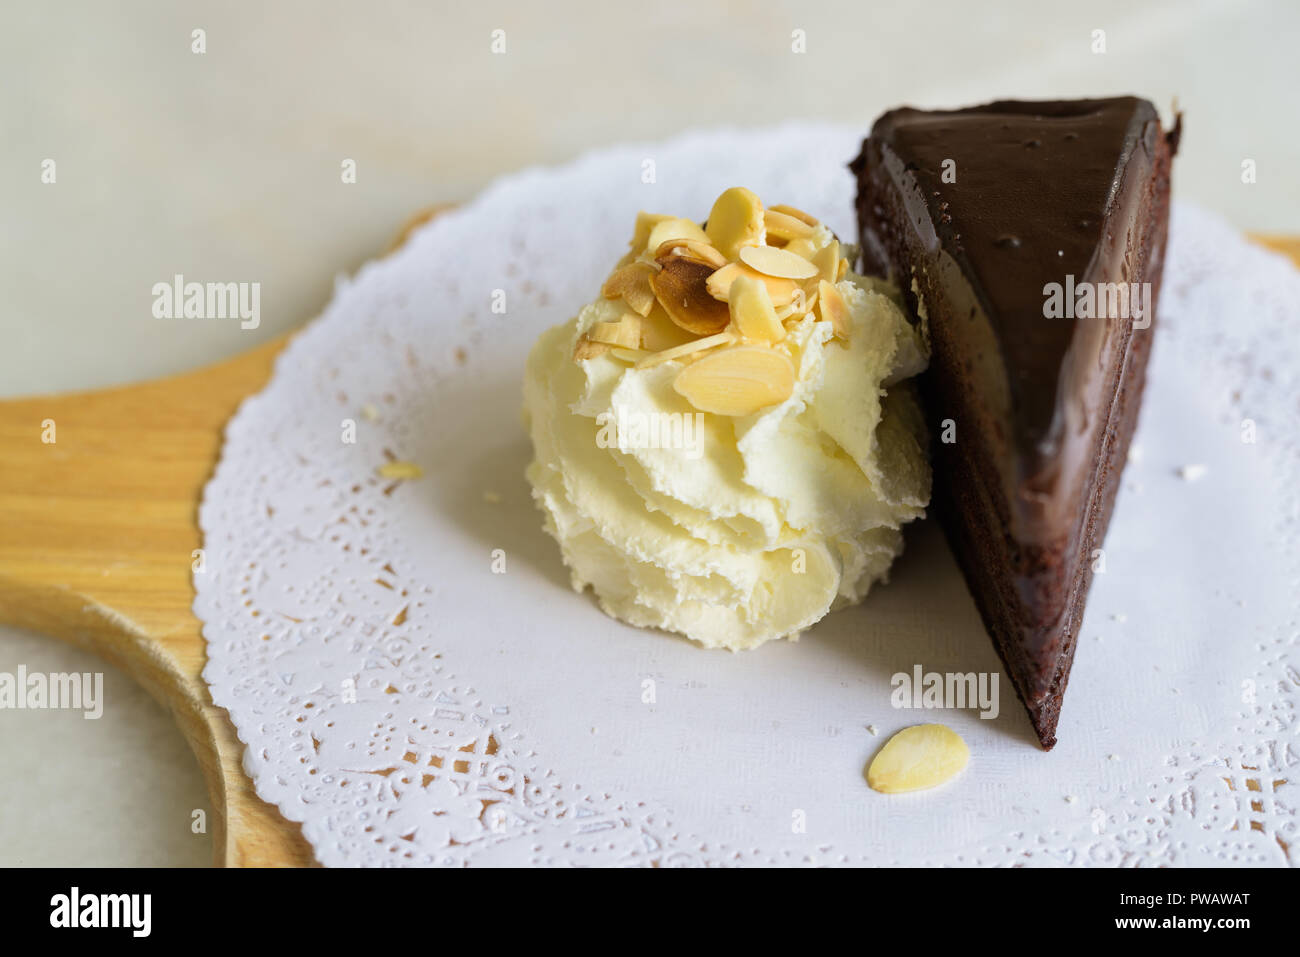 High Angle View Of Chocolate Cake Slice With Whipped Cream Stock Photo